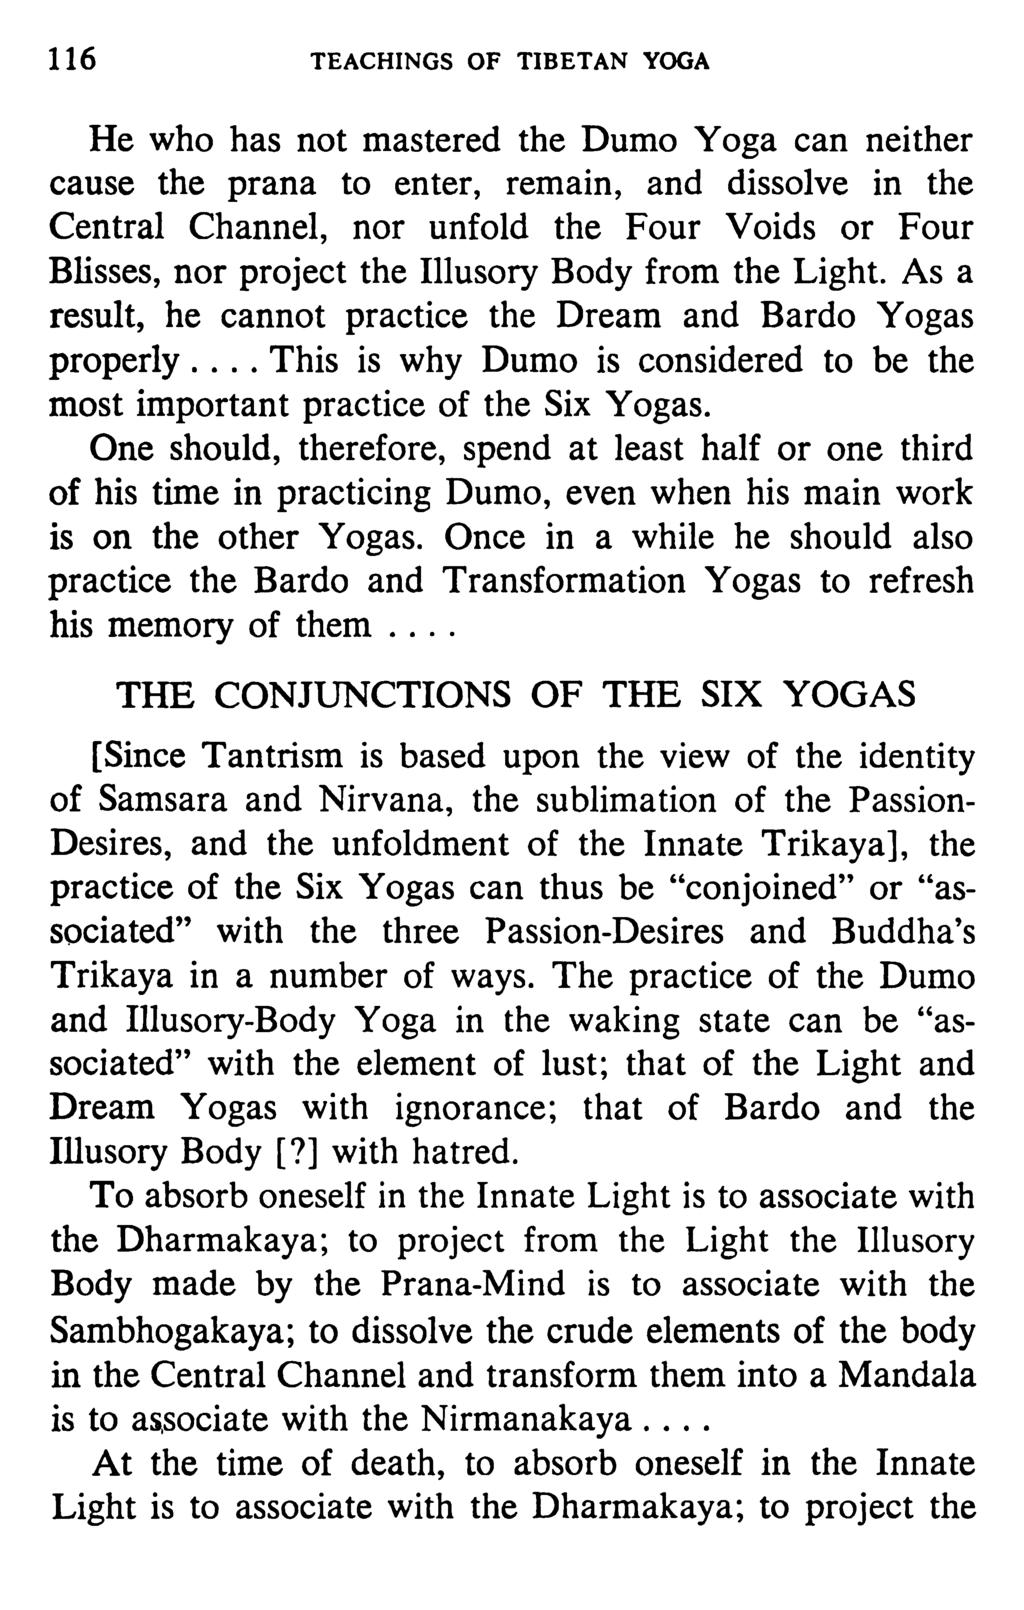 116 TEACHINGS OF TIBETAN YOGA He who has not mastered the Dumo Yoga can neither cause the prana to enter, remain, and dissolve in the Central Channel, nor unfold the Four Voids or Four Blisses, nor